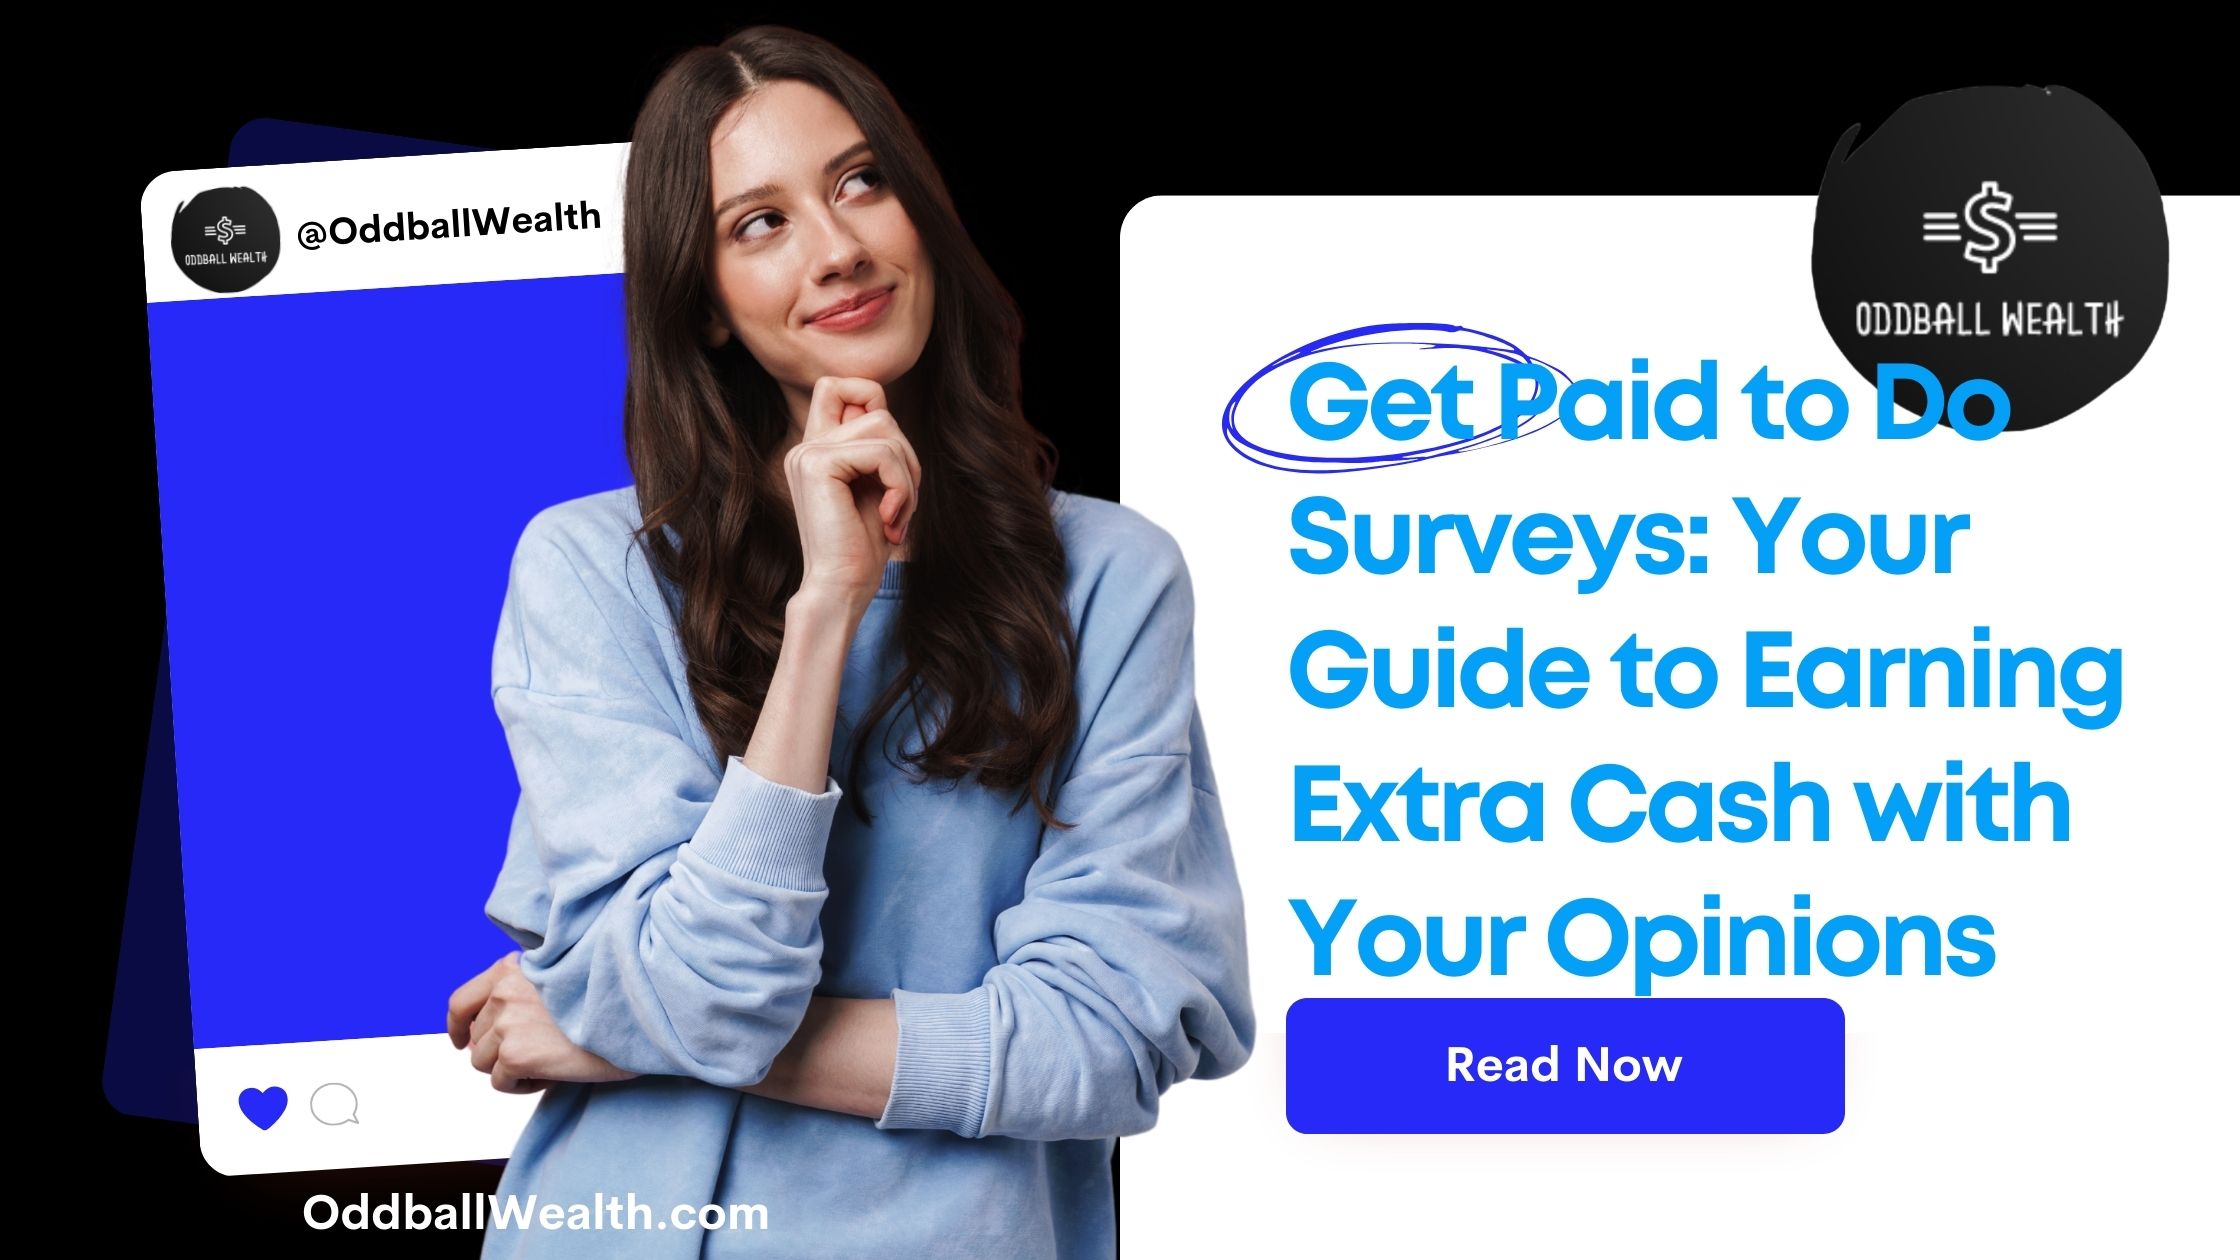 Learn the Best Ways to Get Paid to Do Surveys: Your Guide to Earning Extra Cash with Your Opinions!